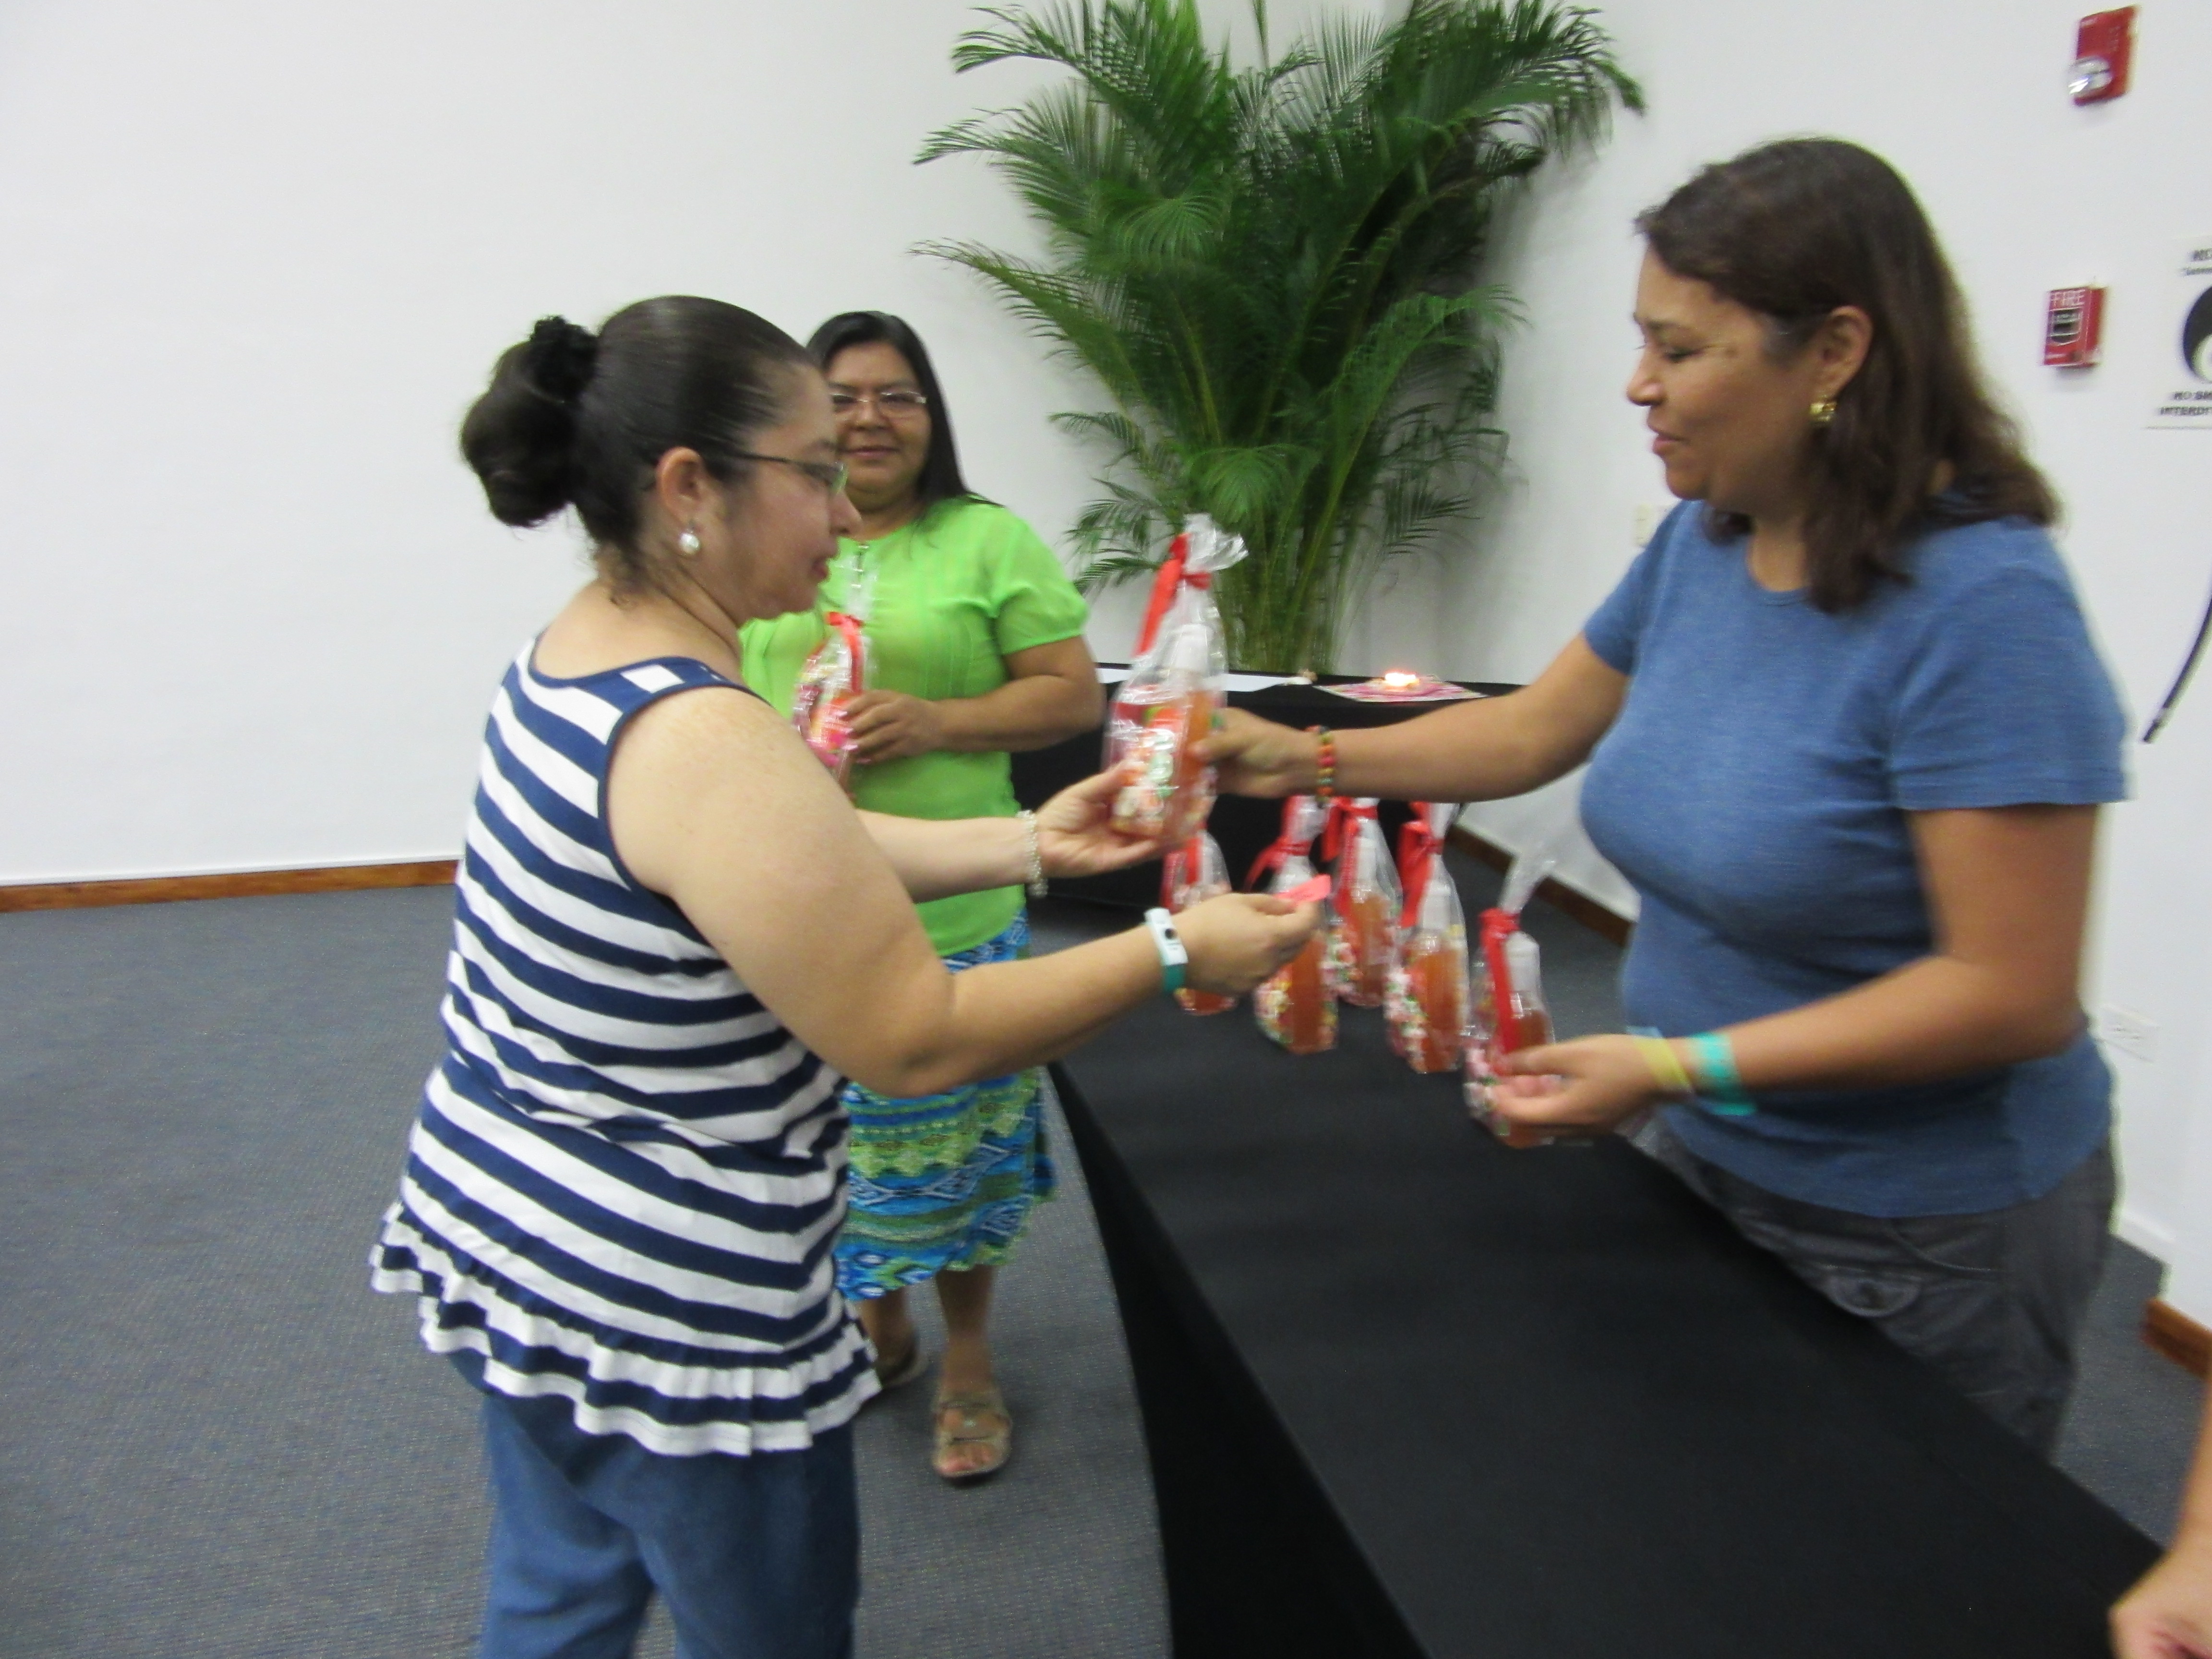 Sister Pati presenting lotions donated for raffle